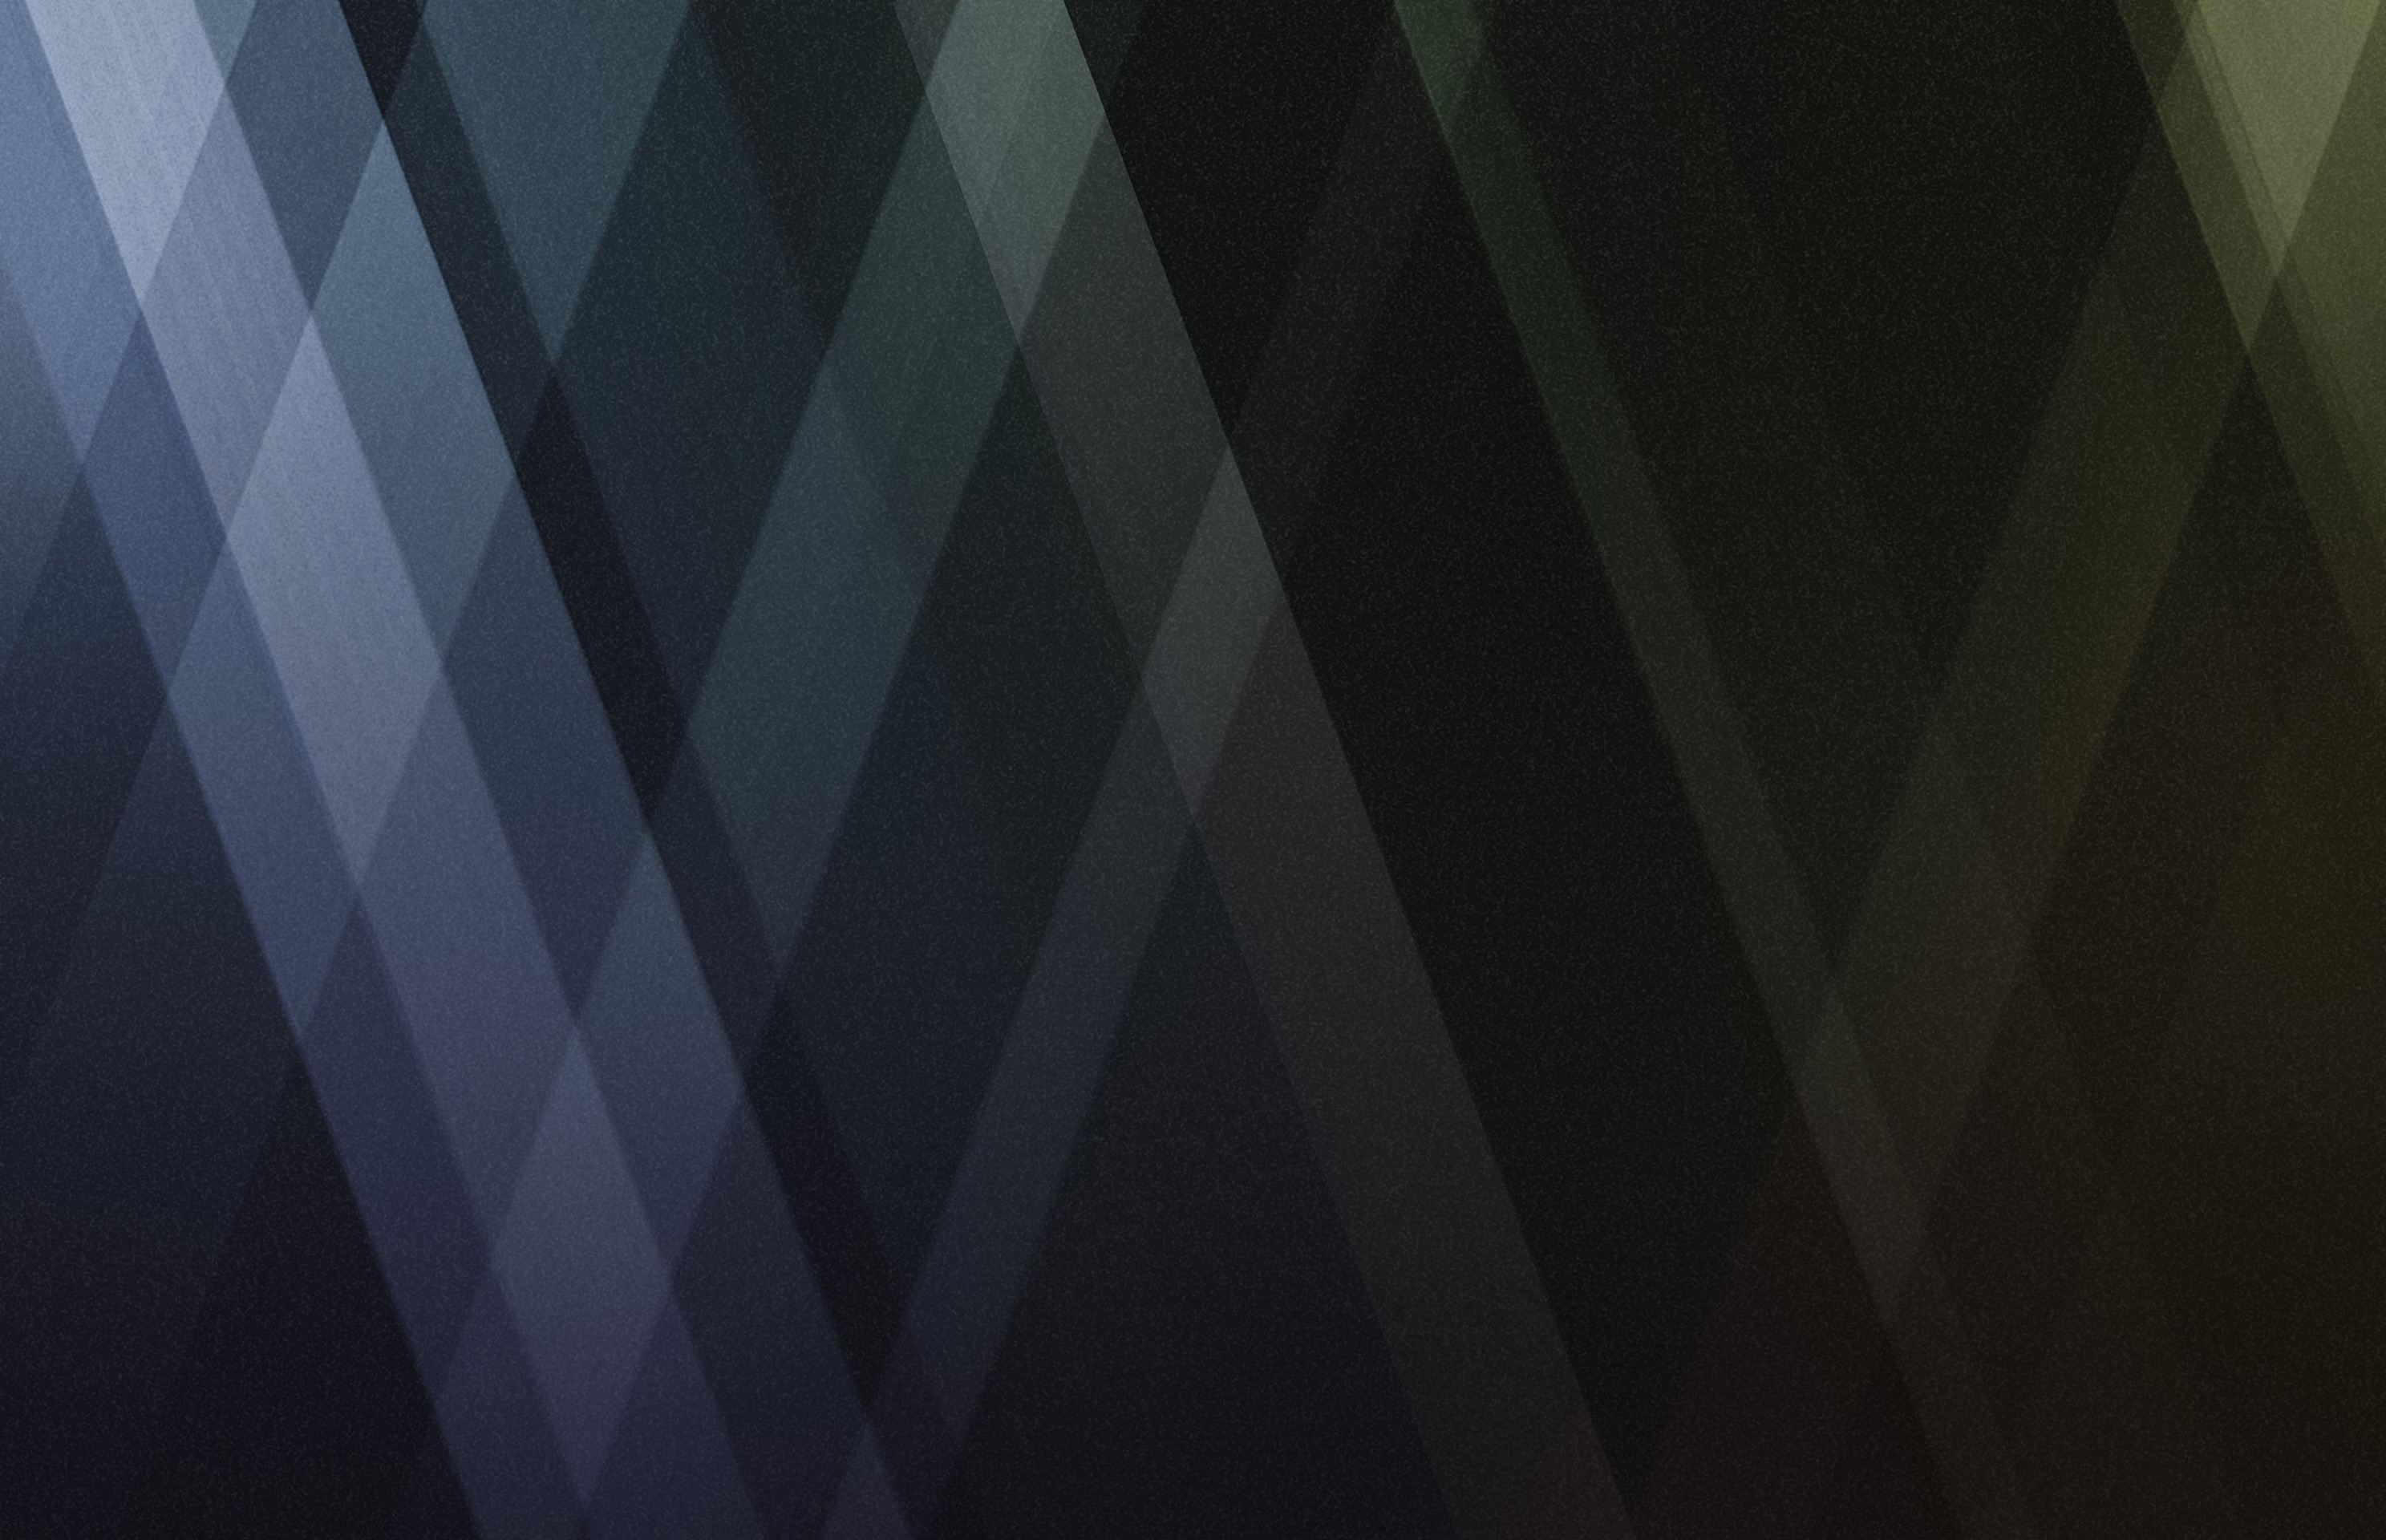 2975x1920 image from Wallpapers from new Nexus 7 leak out and you can download them  here